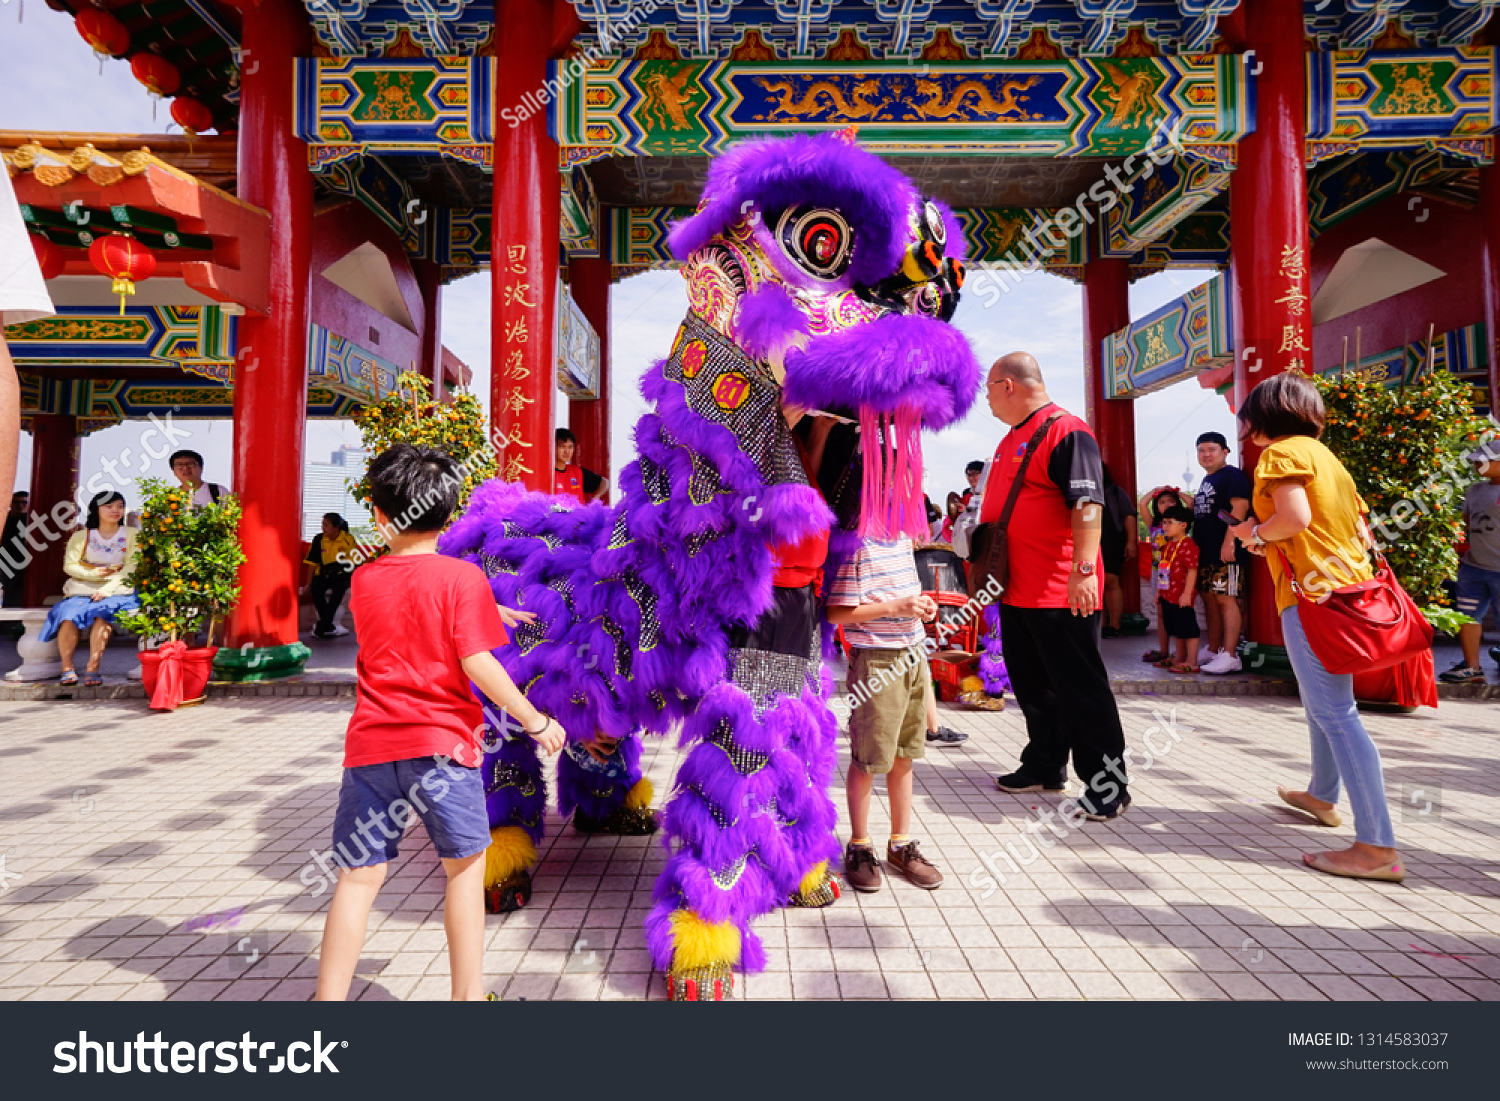 KUALA LUMPUR, MALAYSIA - FEBRUARY 2019 : People do not miss the opportunity to touch and give Ang Pow during Chinese New Year Lion Dance performances at Thean Hou Temple. #1314583037